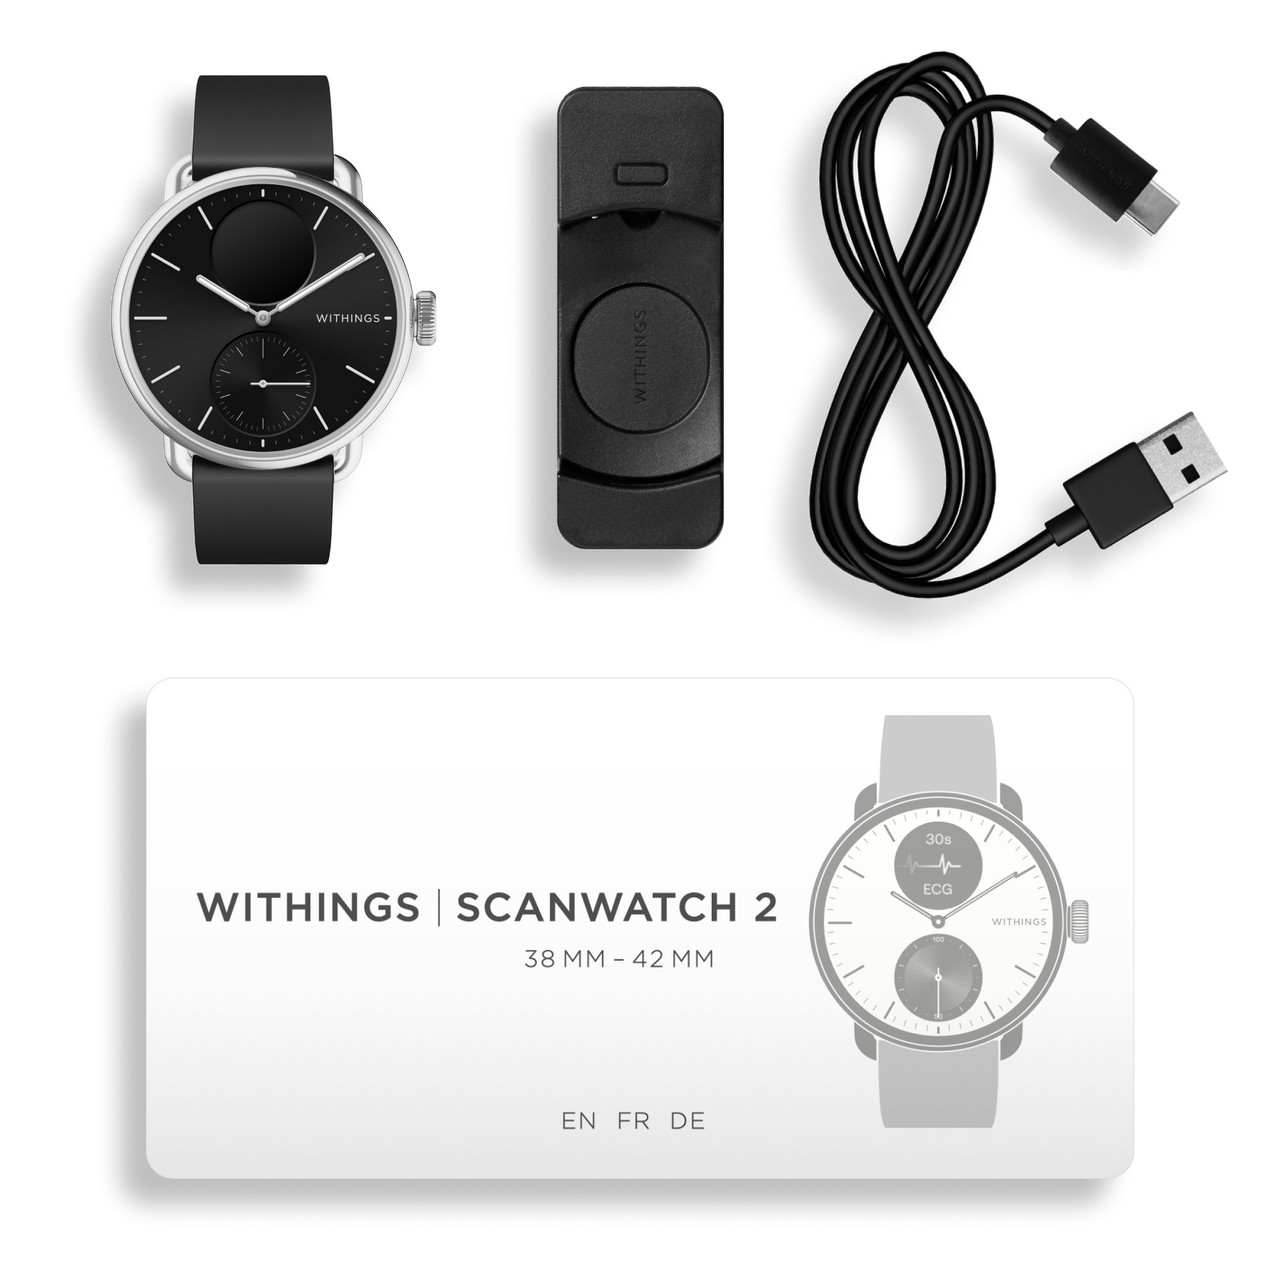 Withings ScanWatch 2 - Watch, Daily Health - Medical Smart Black View Simply